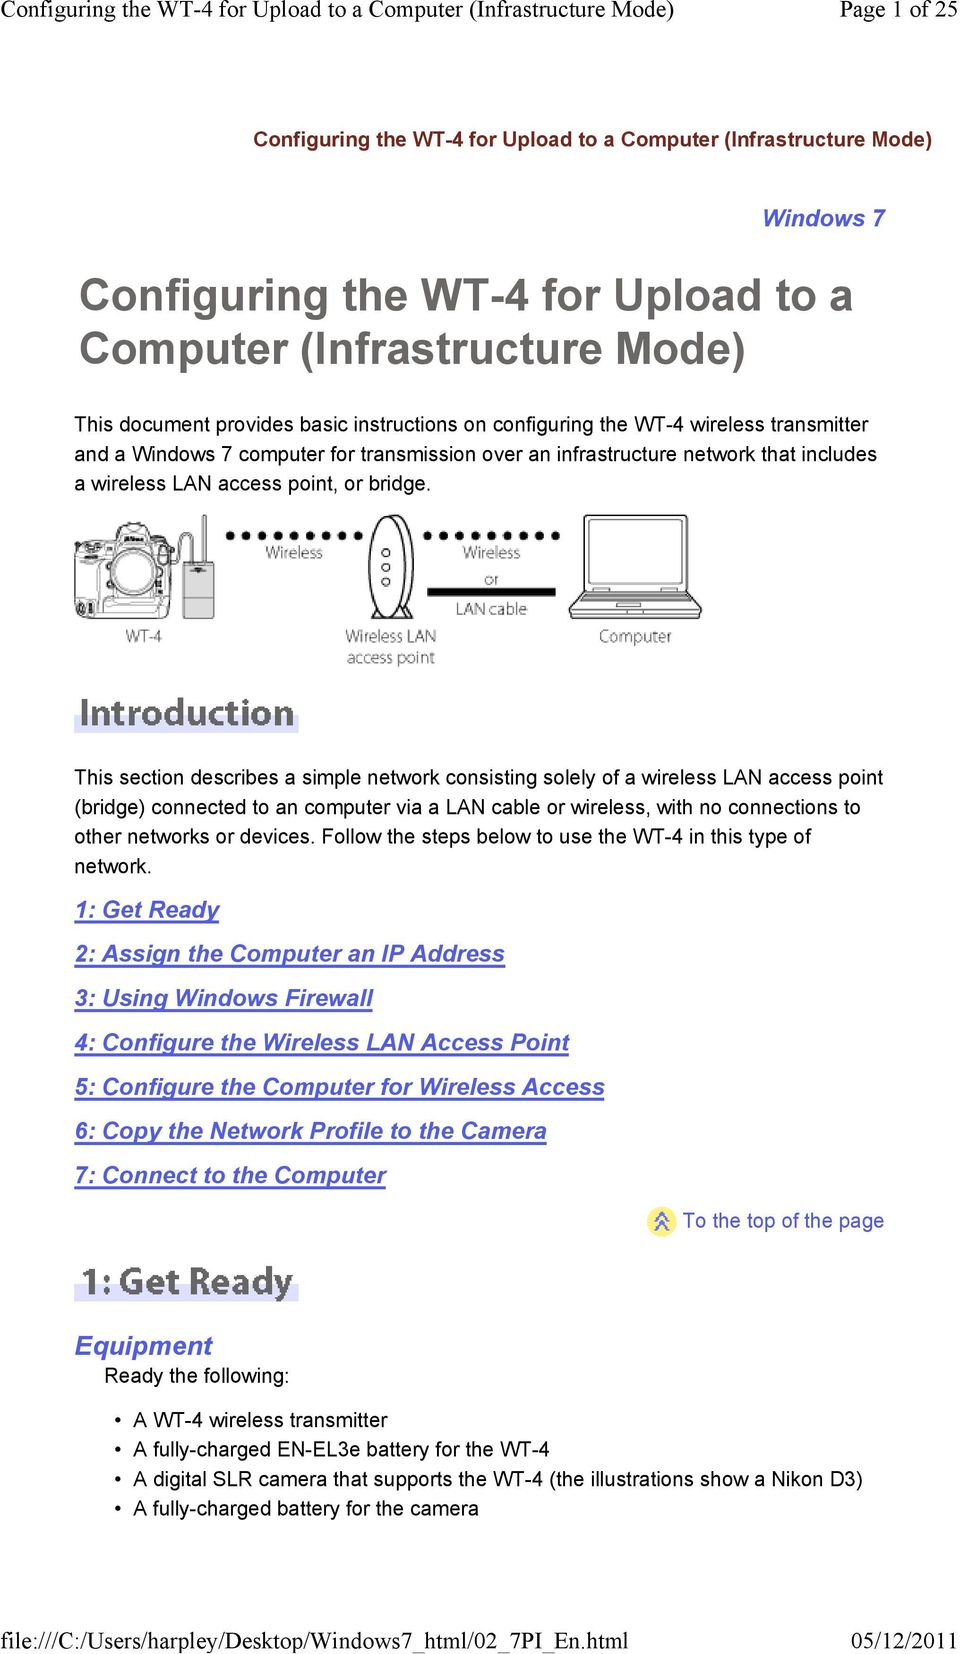 This section describes a simple network consisting solely of a wireless LAN access point (bridge) connected to an computer via a LAN cable or wireless, with no connections to other networks or